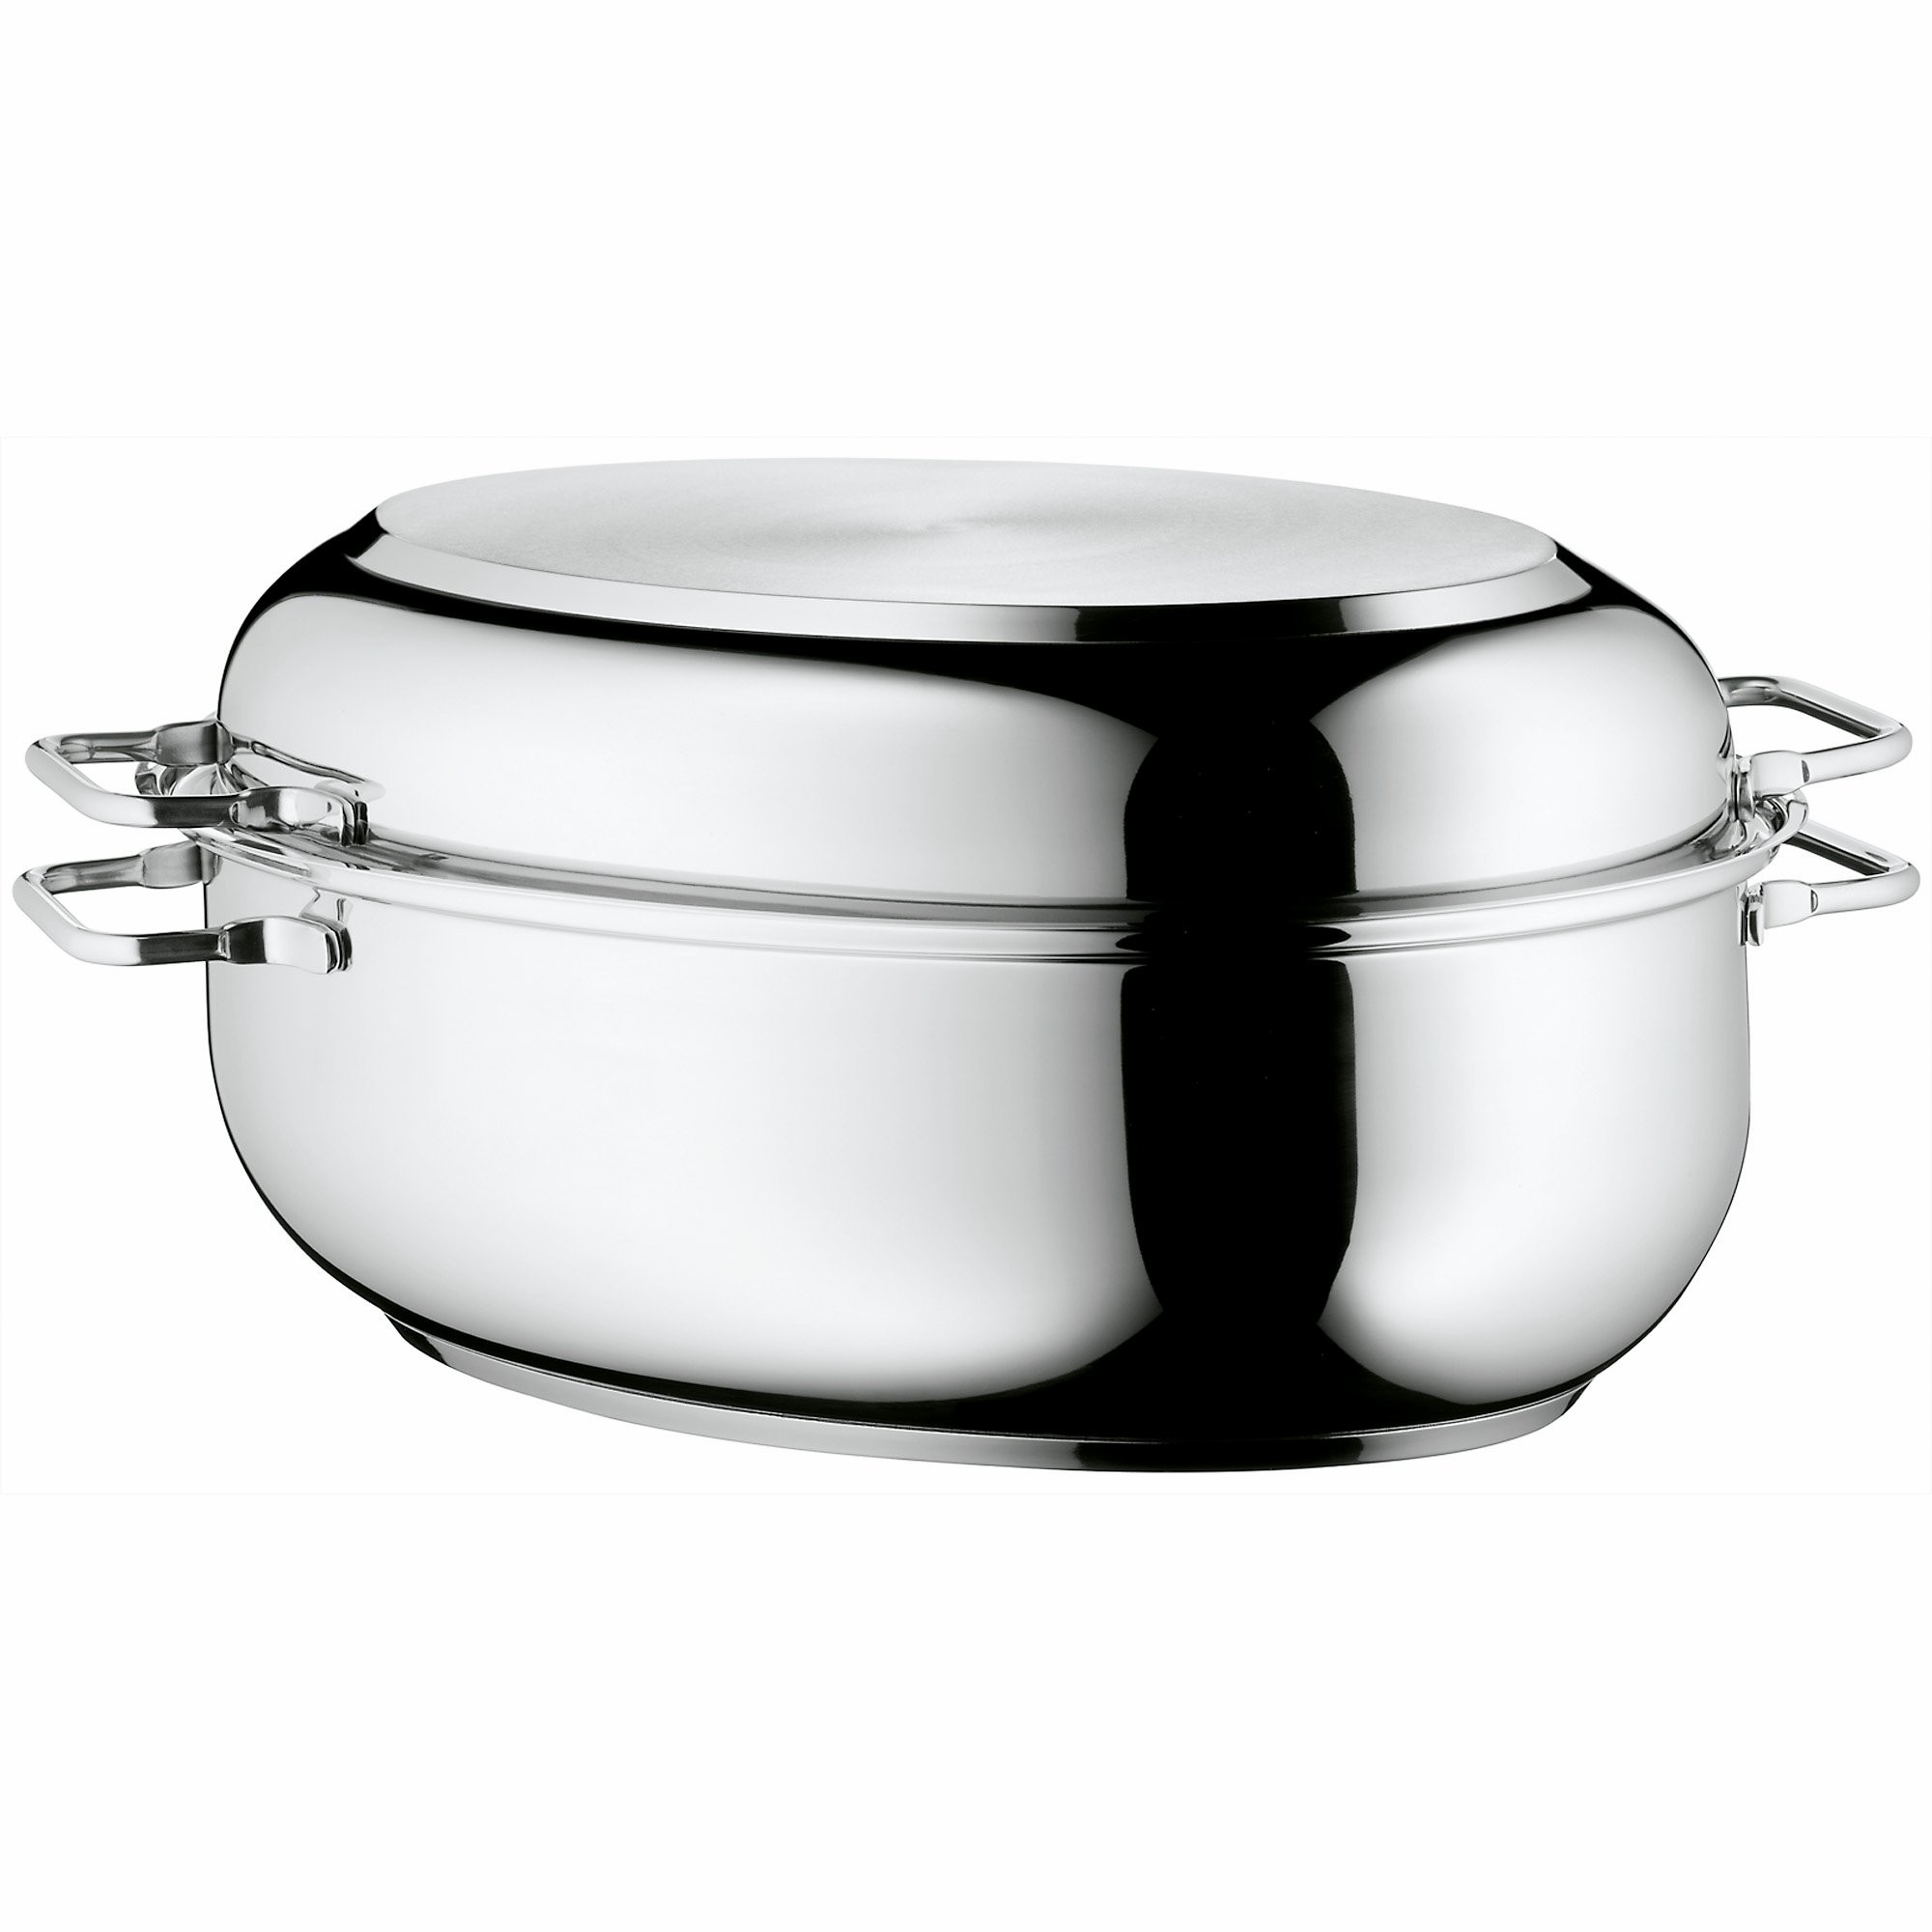 WMF Stainless Steel Deep Oval Roasting Pan, 16-1/4-Inch